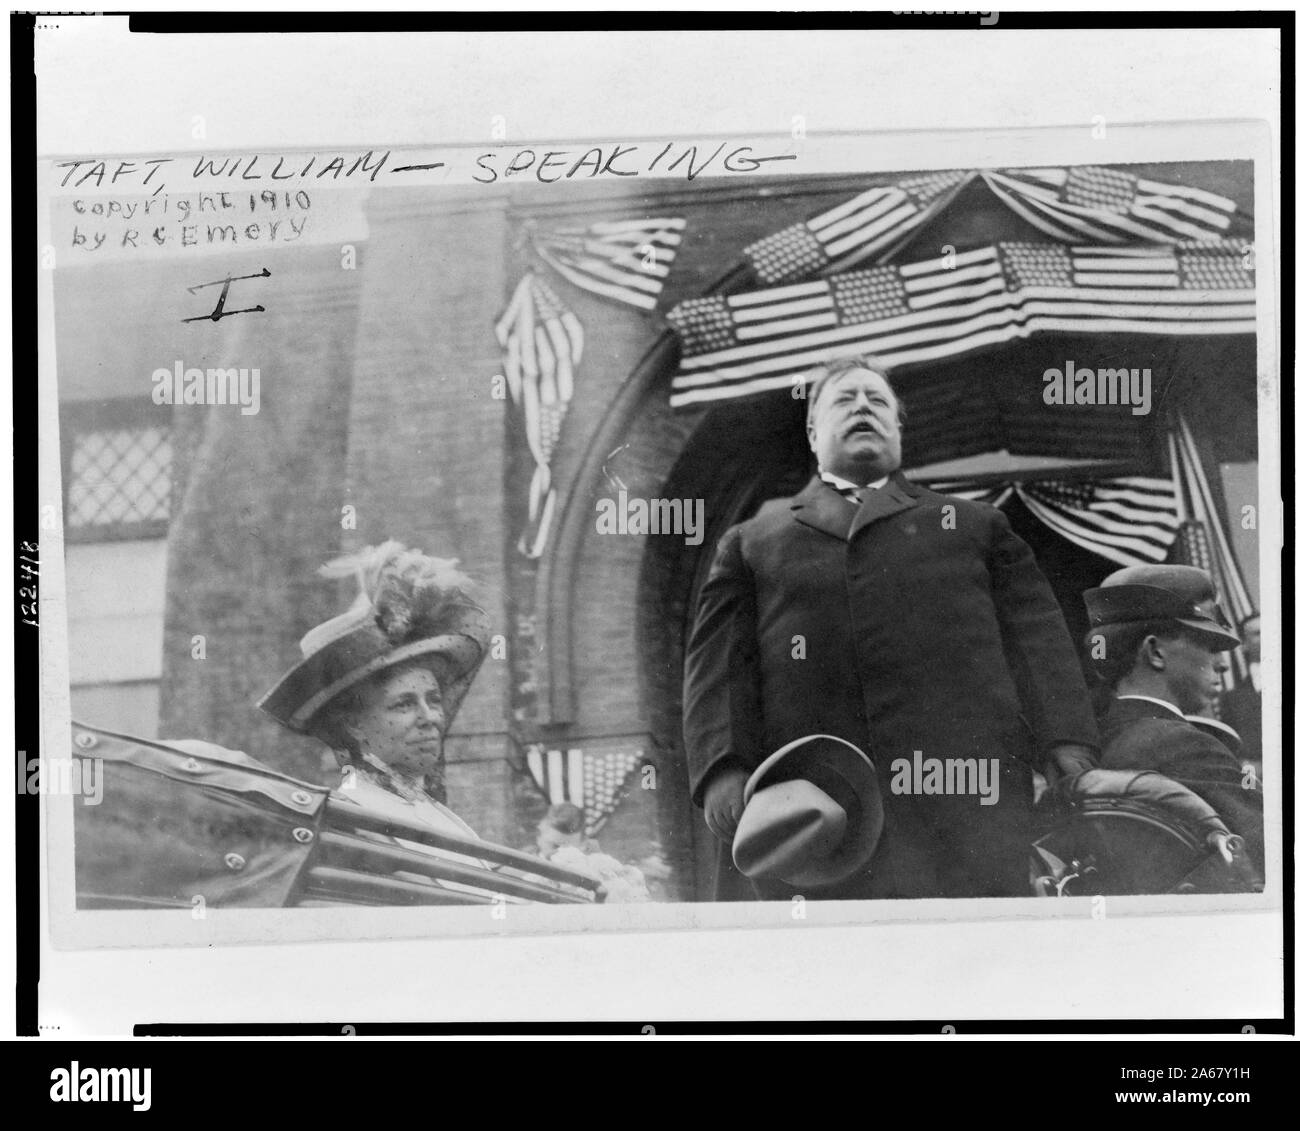 William Howard Taft, half-length portrait, standing in back of open-air car, facing front, speaking, with his wife Stock Photo